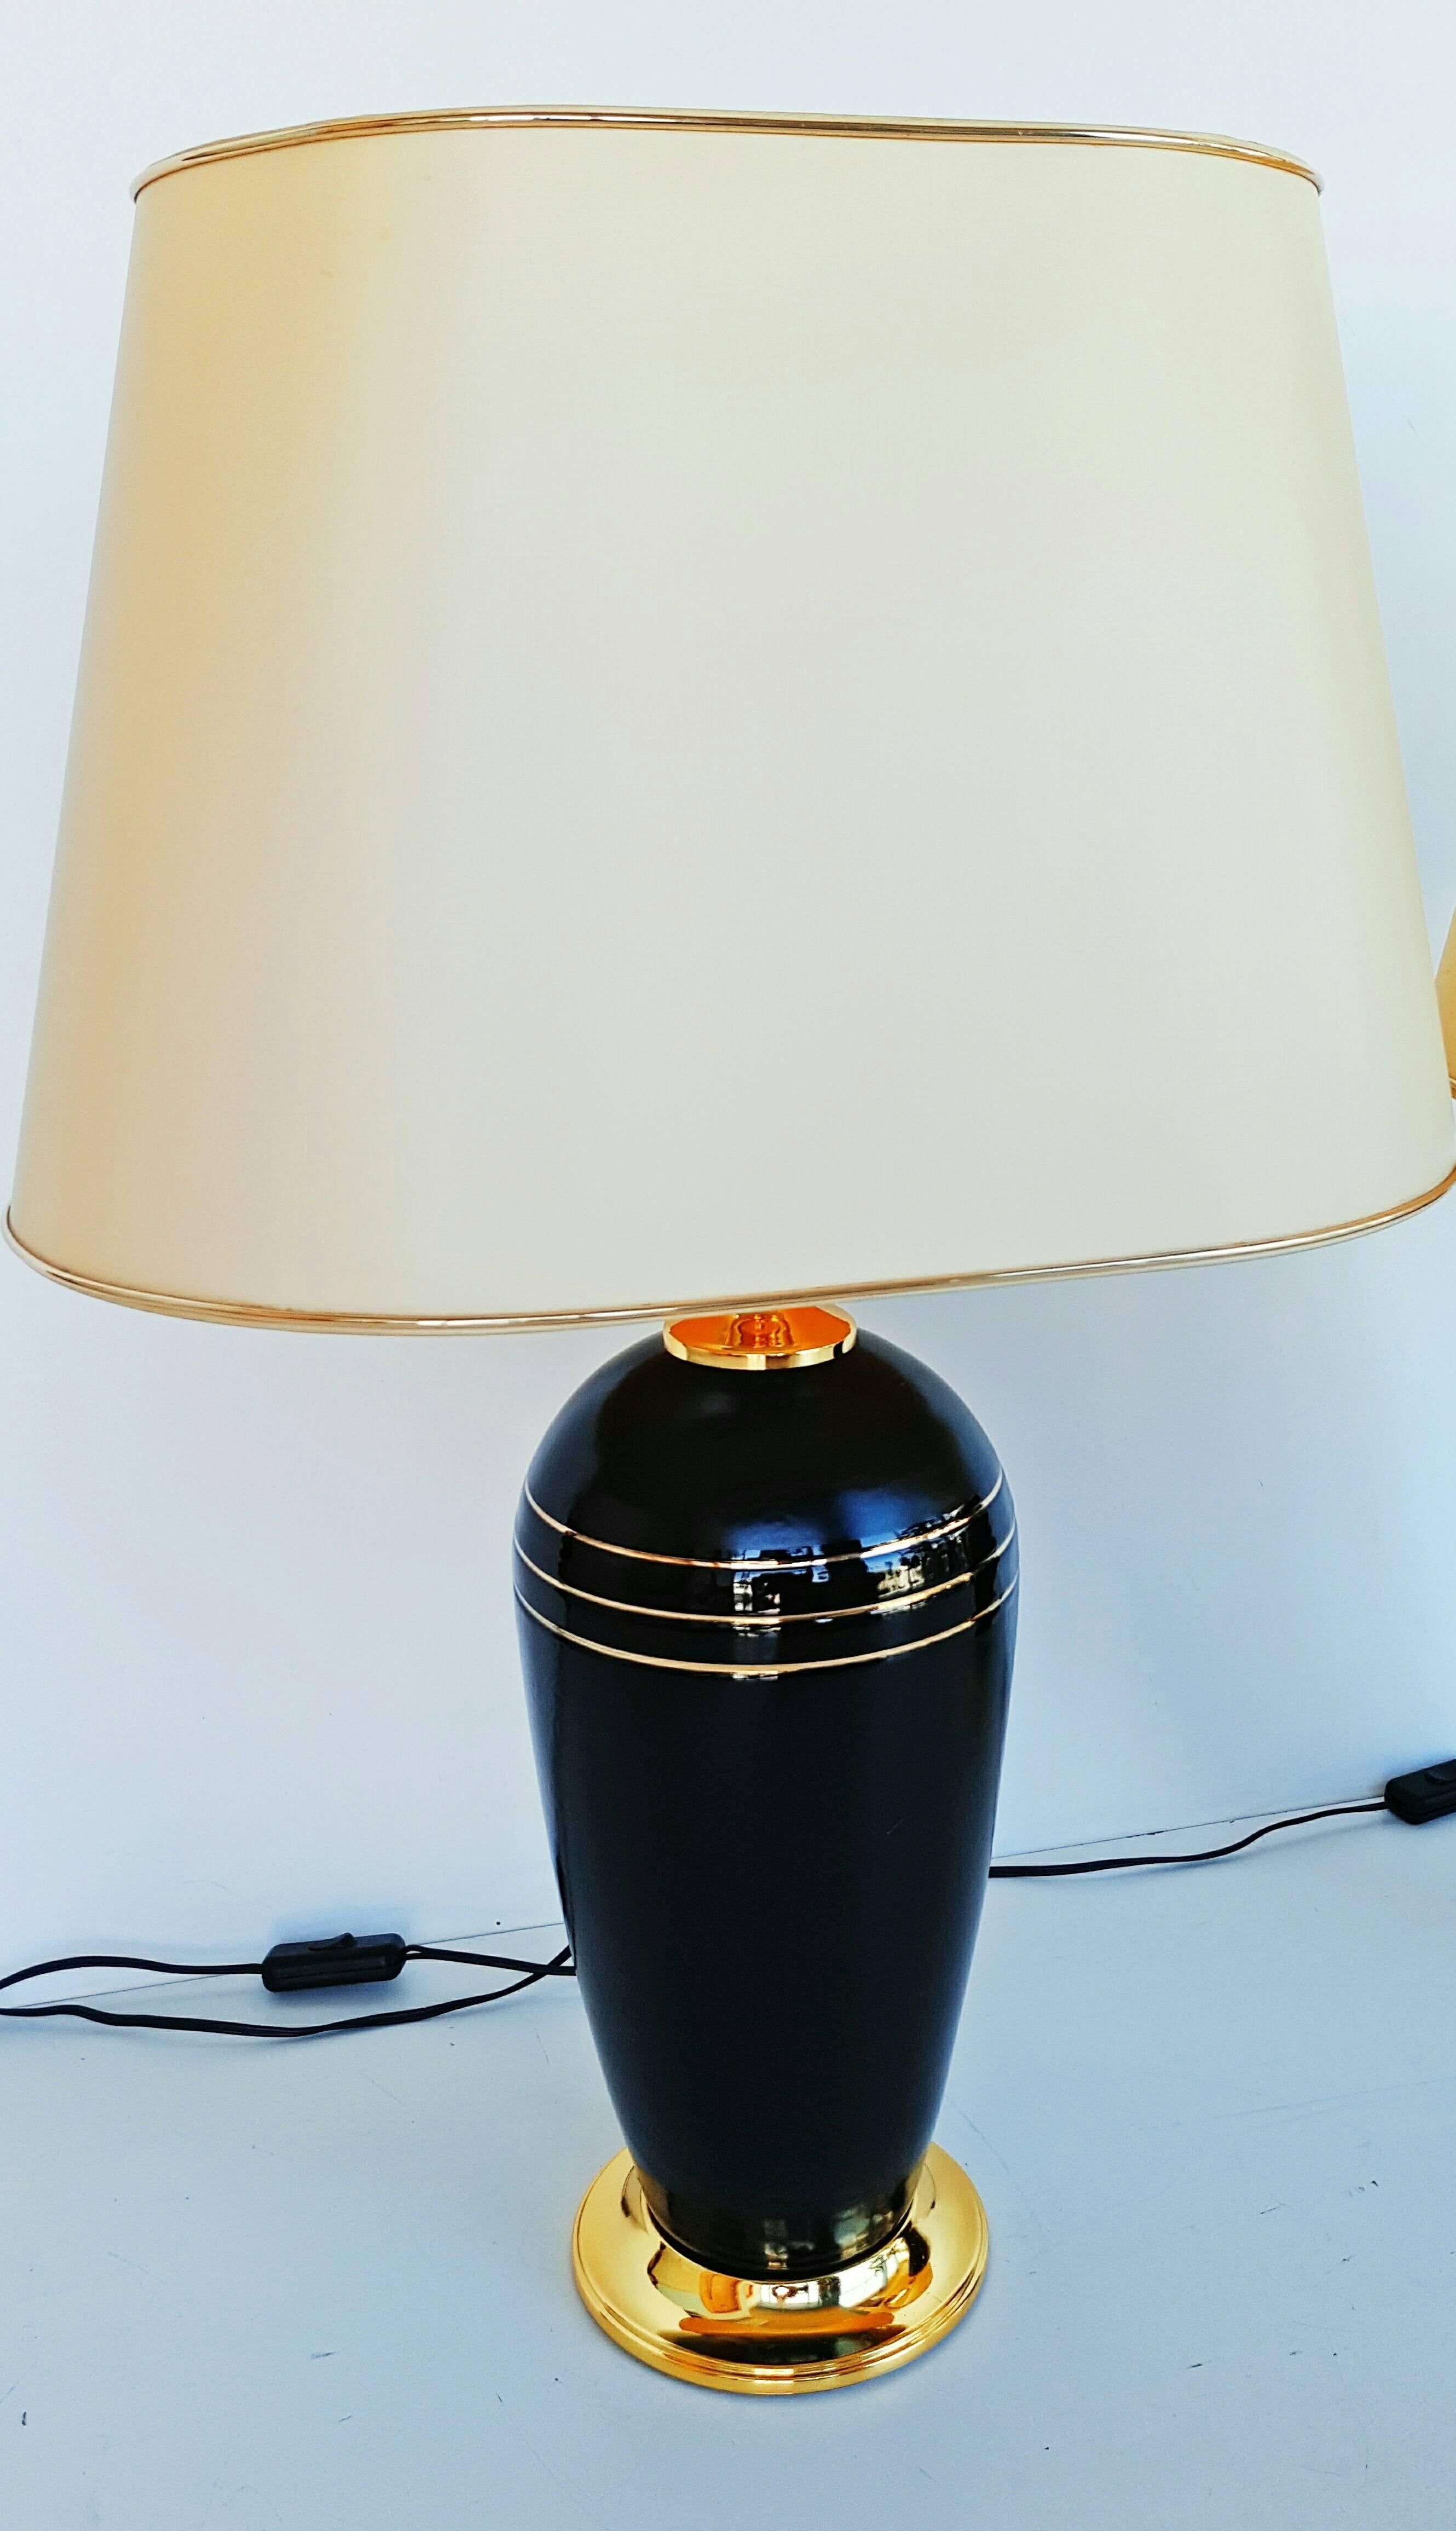 Beautiful pair of Mid-Century lacquered metal and brass table lamps, manufactured in 1970s by Altisent, a hight quality Spanish firm. In perfect vintage condition.